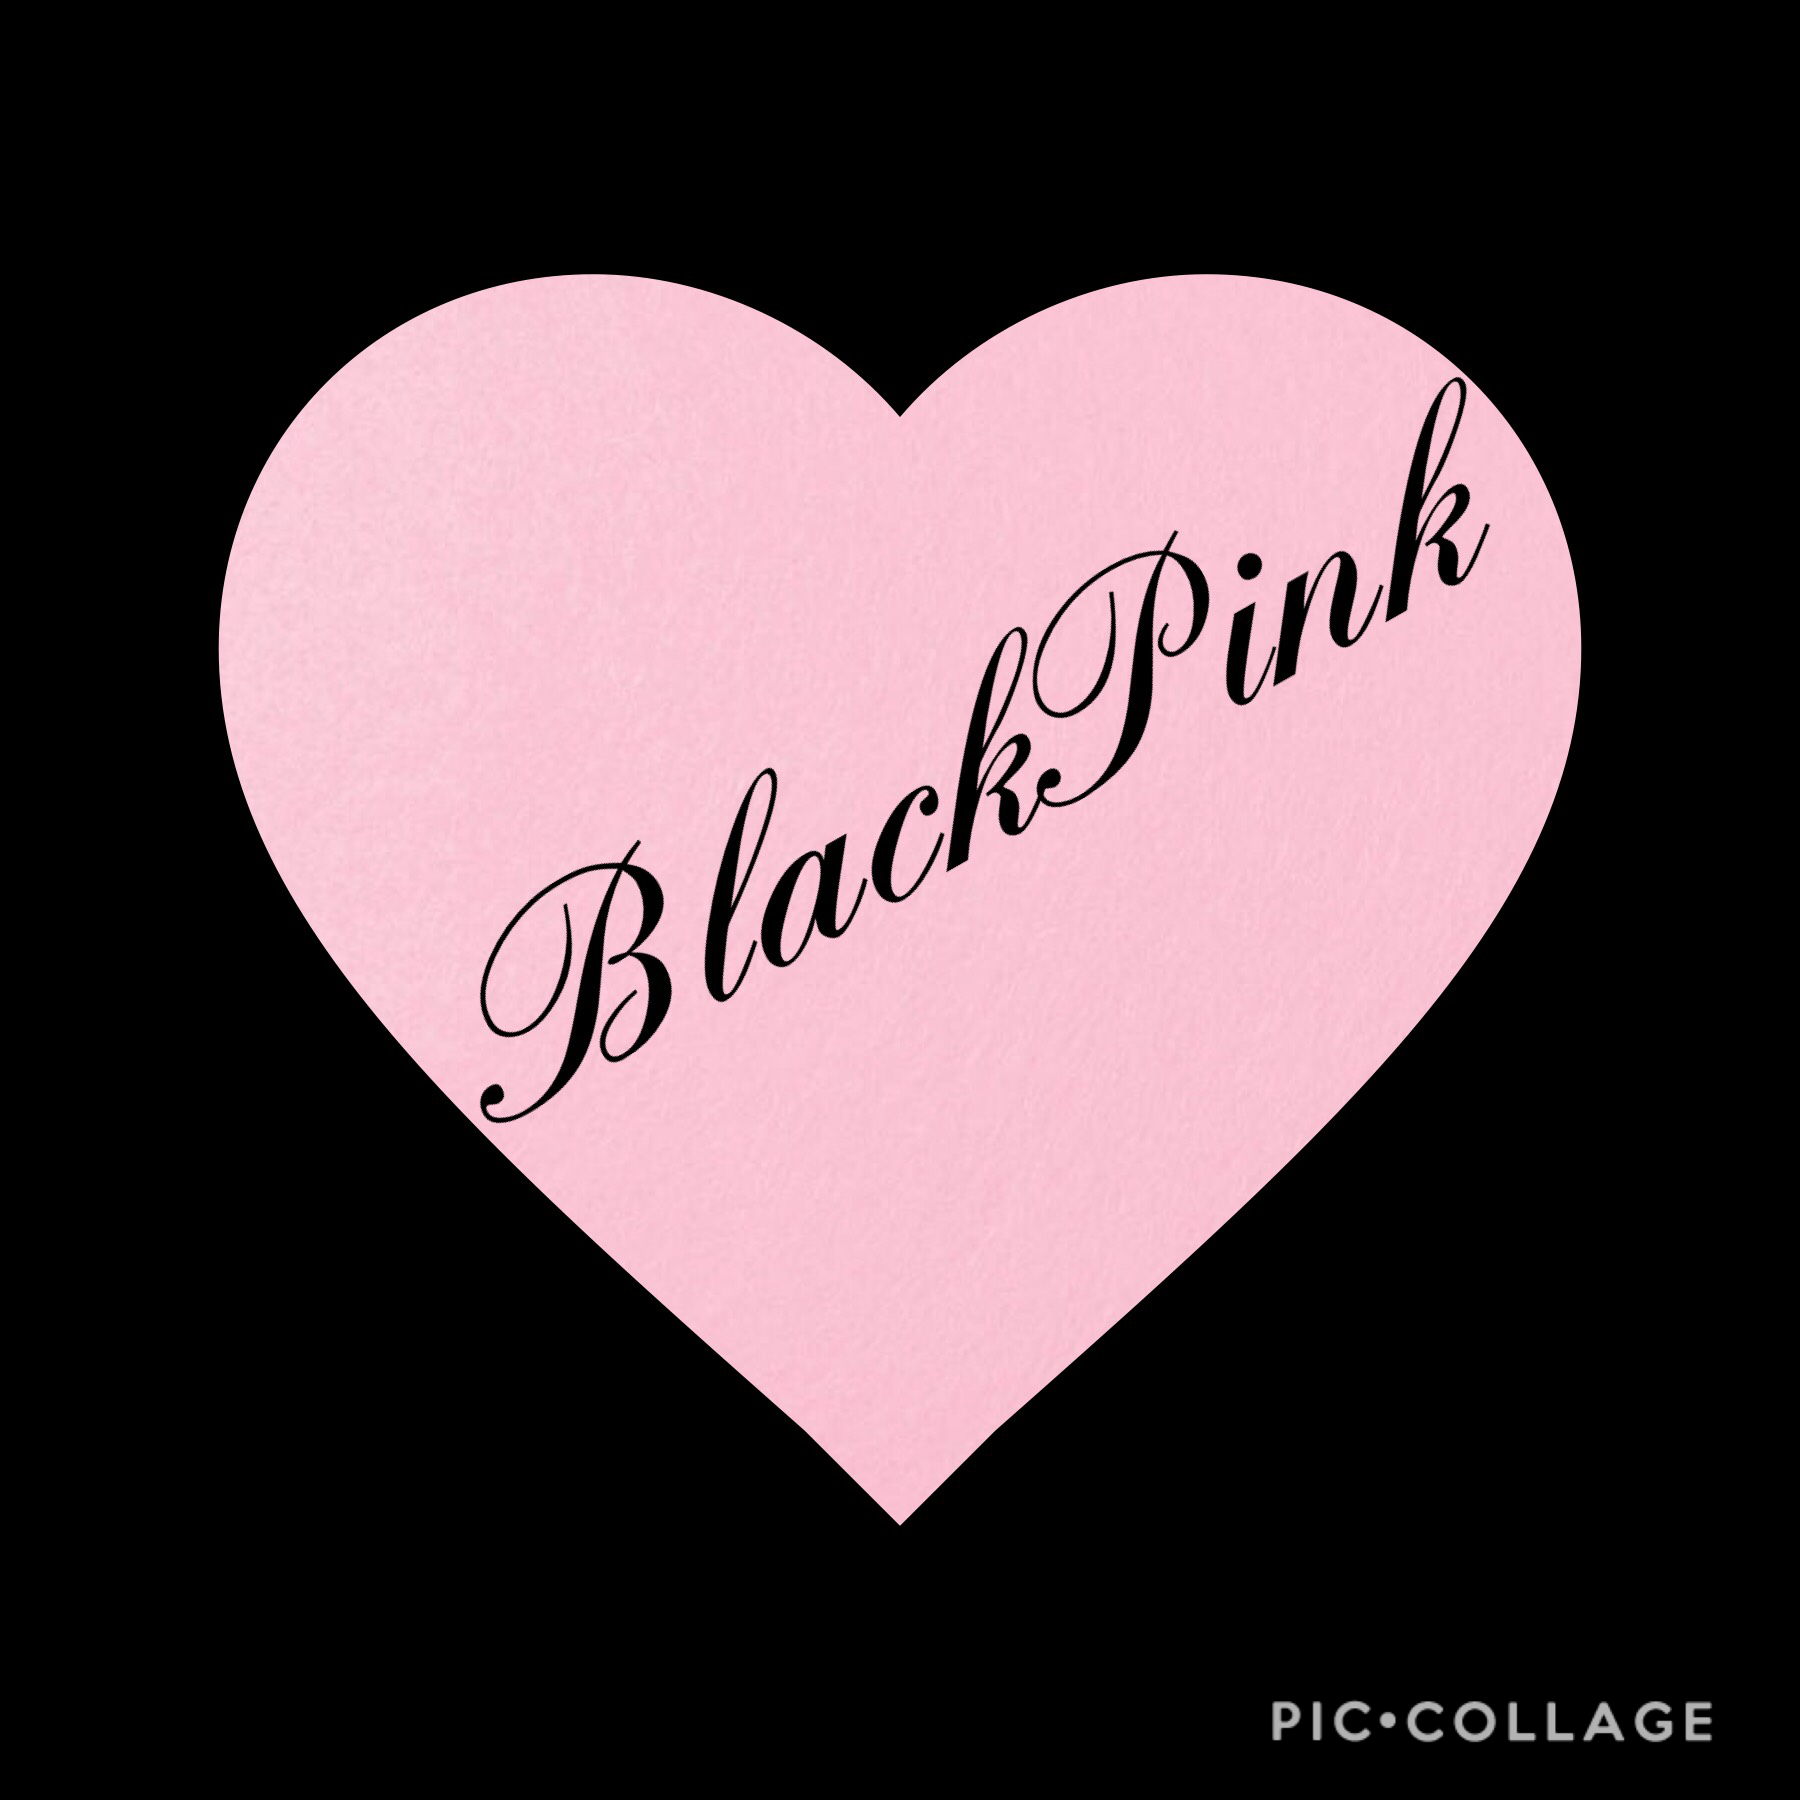 Like if your a Blink ( BLACKPINK fan name )